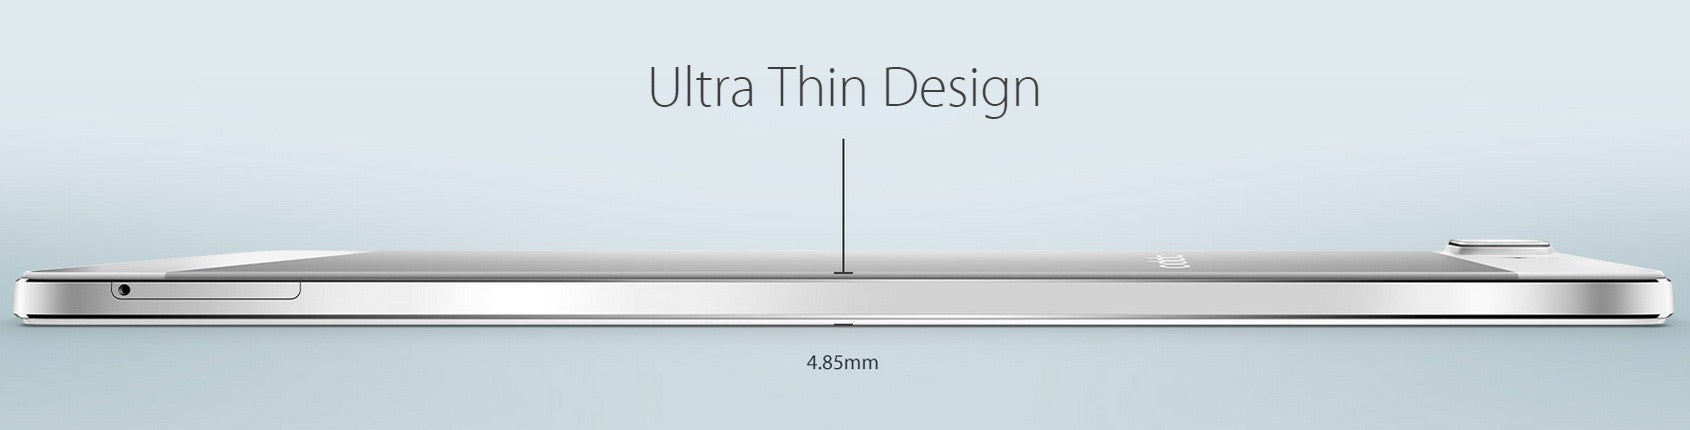 Poll results: Would you buy a smartphone that&#039;s thinner than 5 mm?